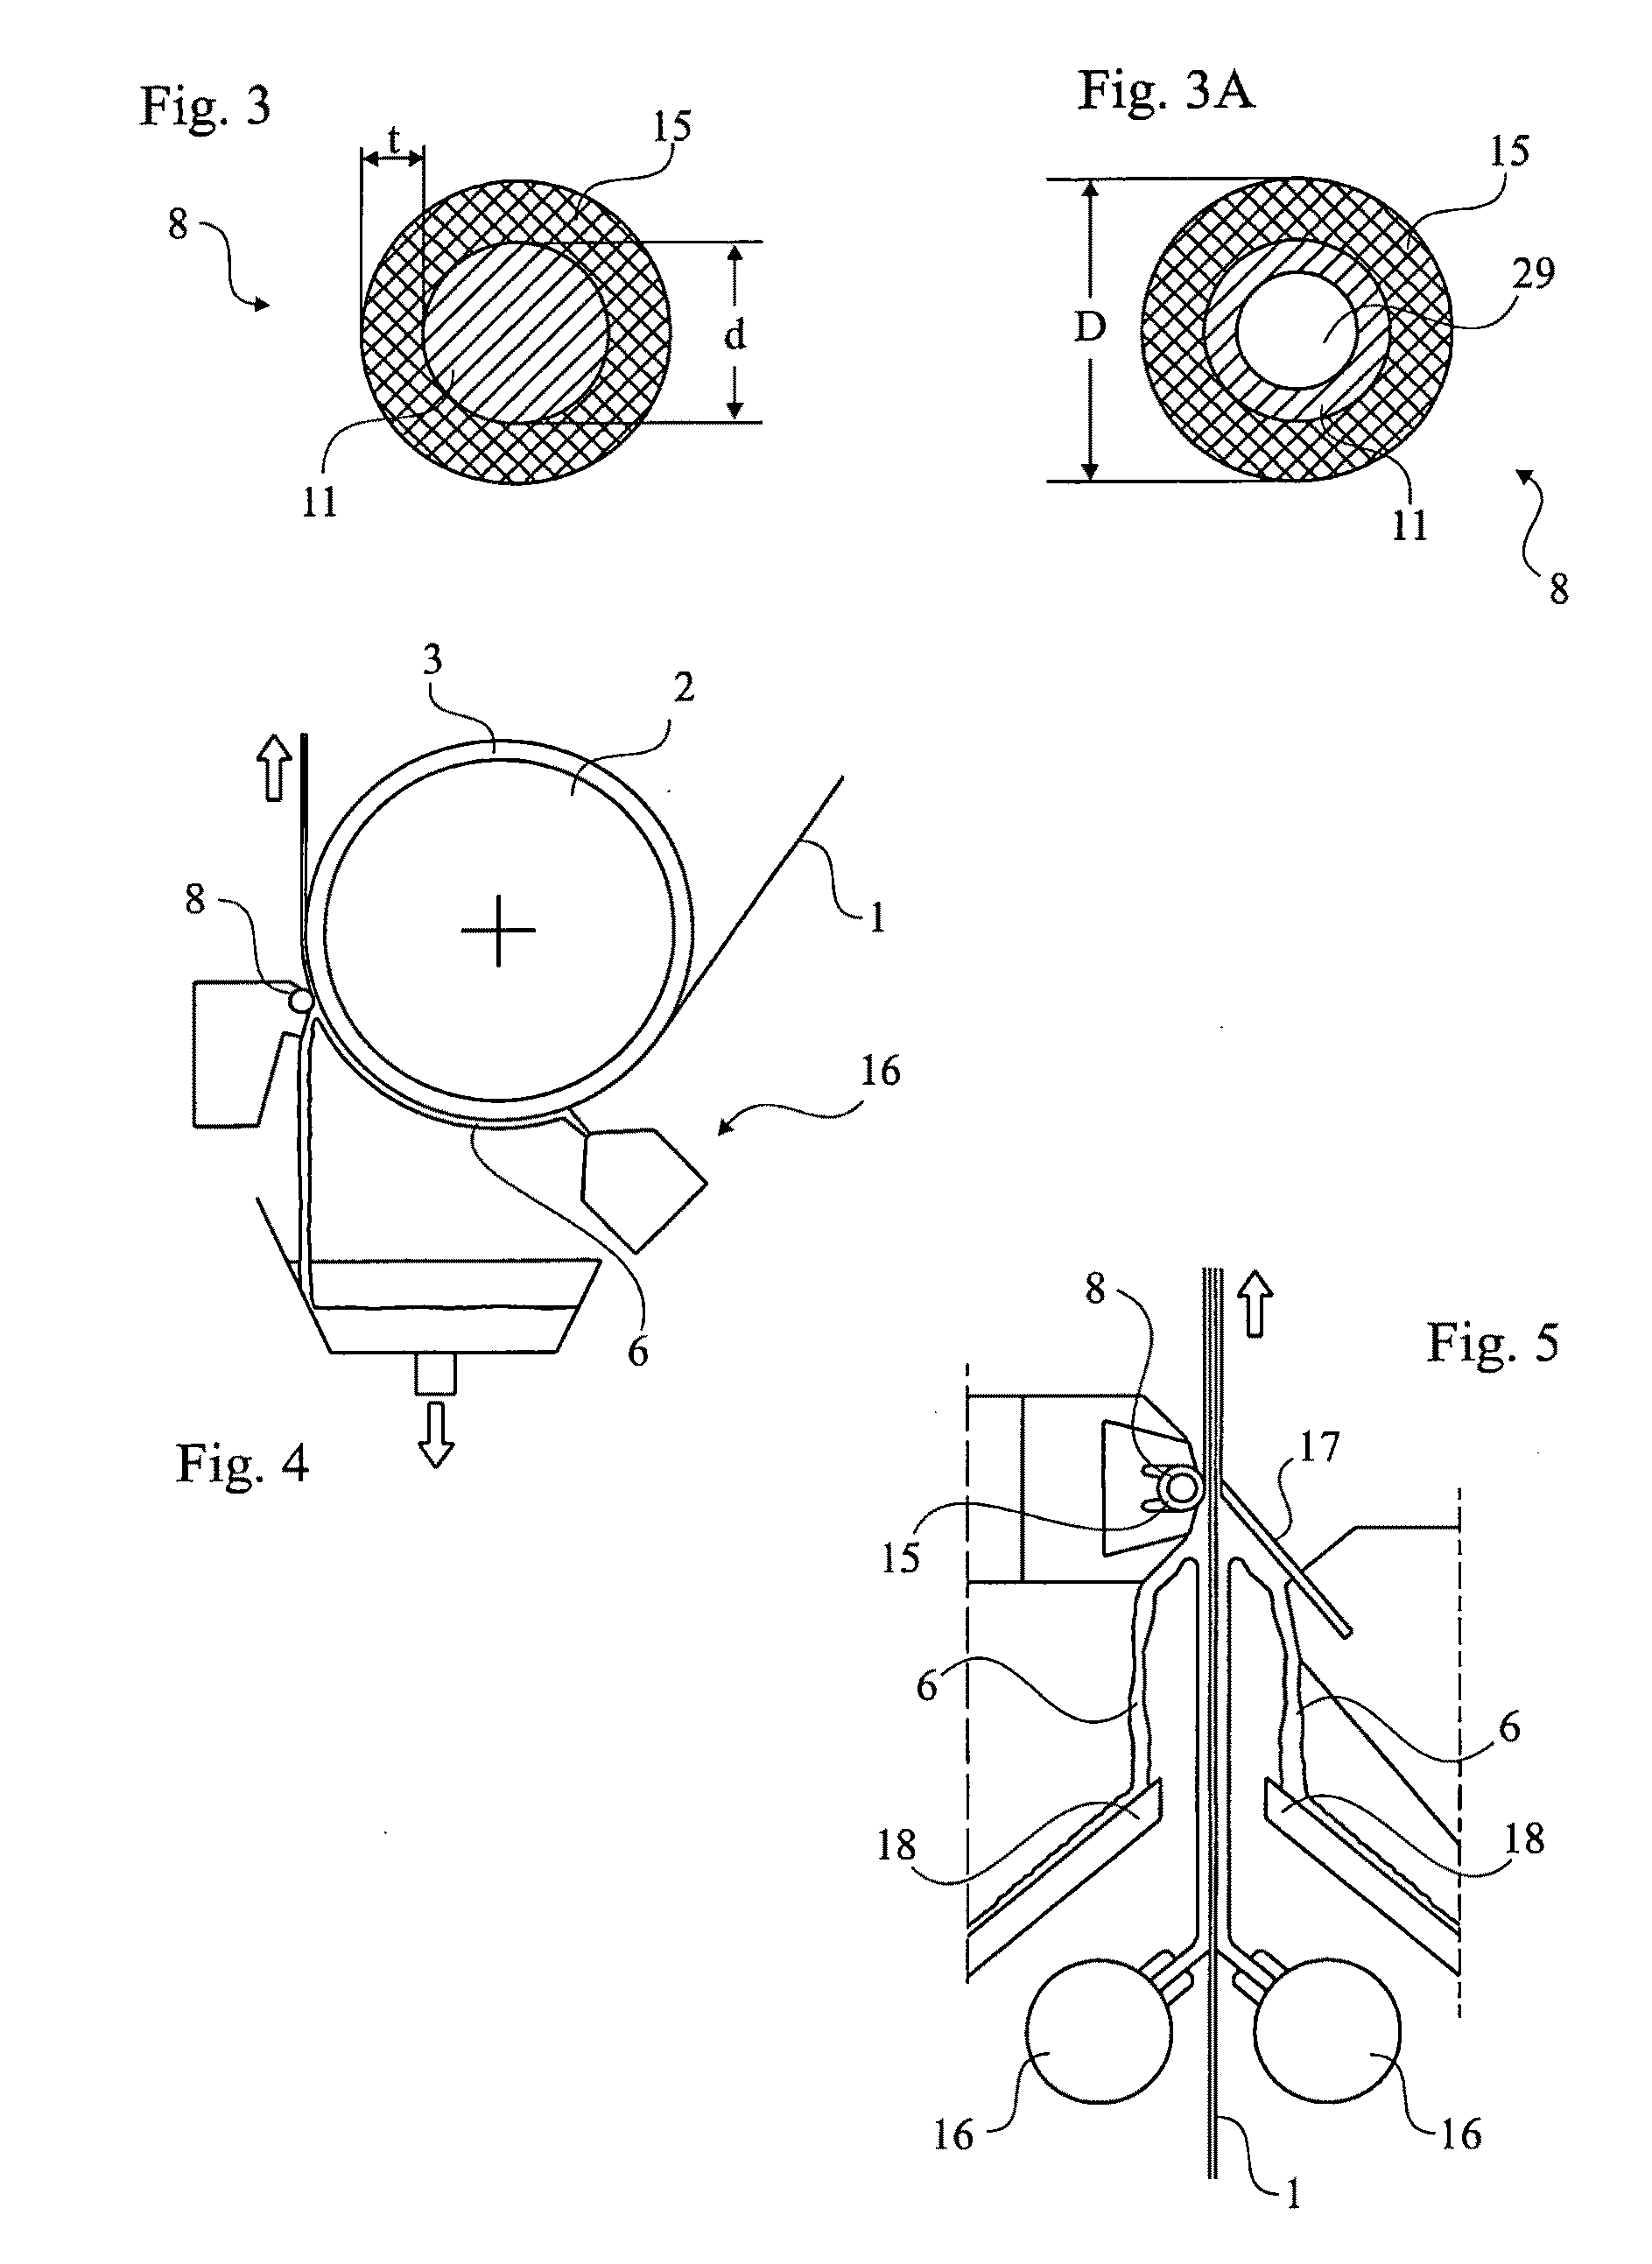 Device and Method for Coating